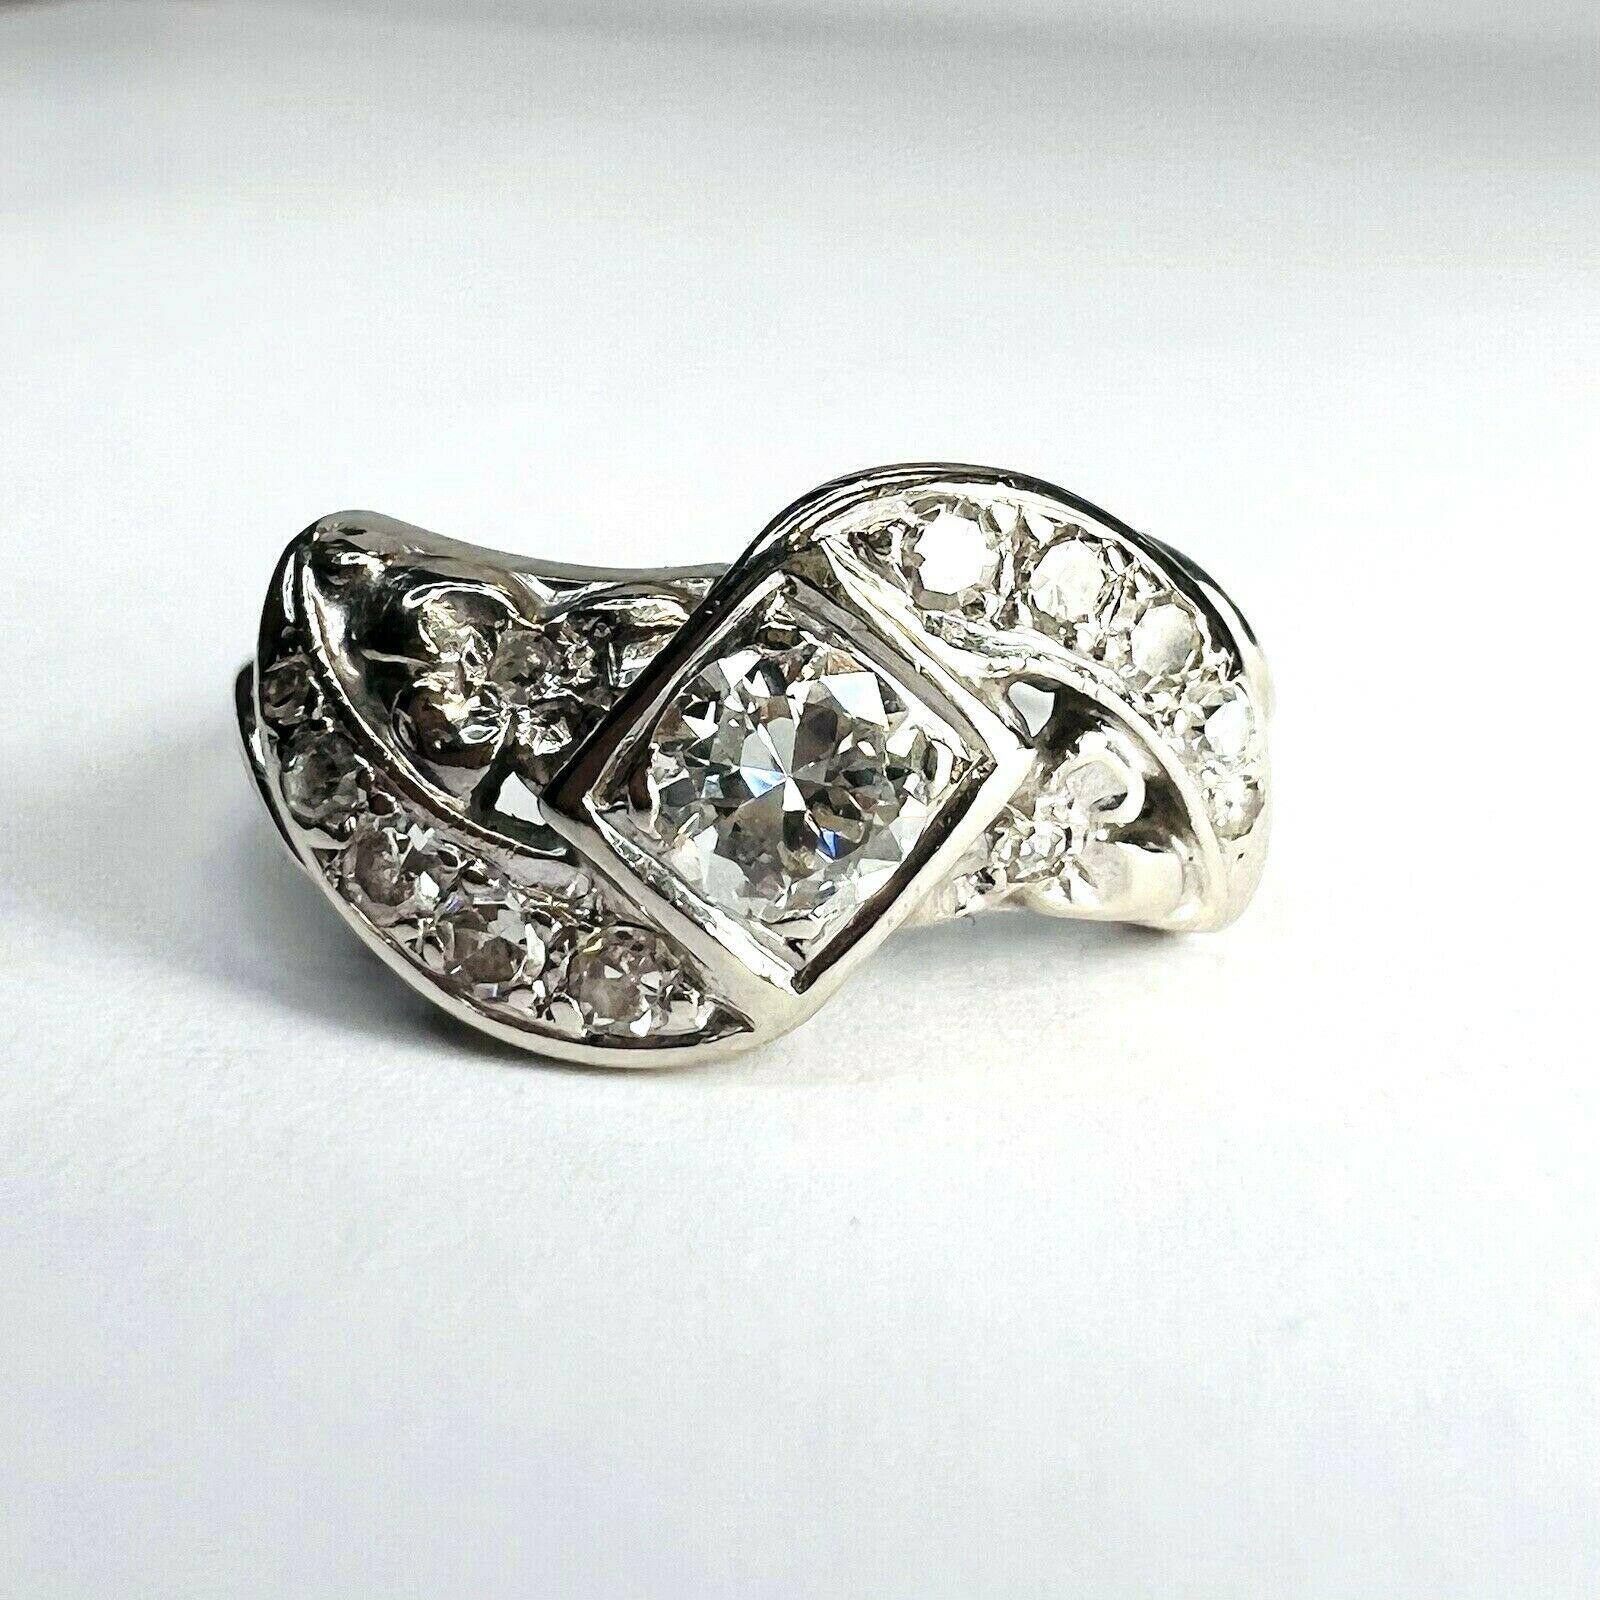 Presenting A:

Solid 14k White Gold Swirl 0.60CTW Diamond Ring Band Size 6.5

This Art Deco swirl ring is made in 14K White Gold with a .35CT brilliant diamond in the center.

All the diamonds are natural and earth mined. 

The Ring is 9mm wide, 4mm